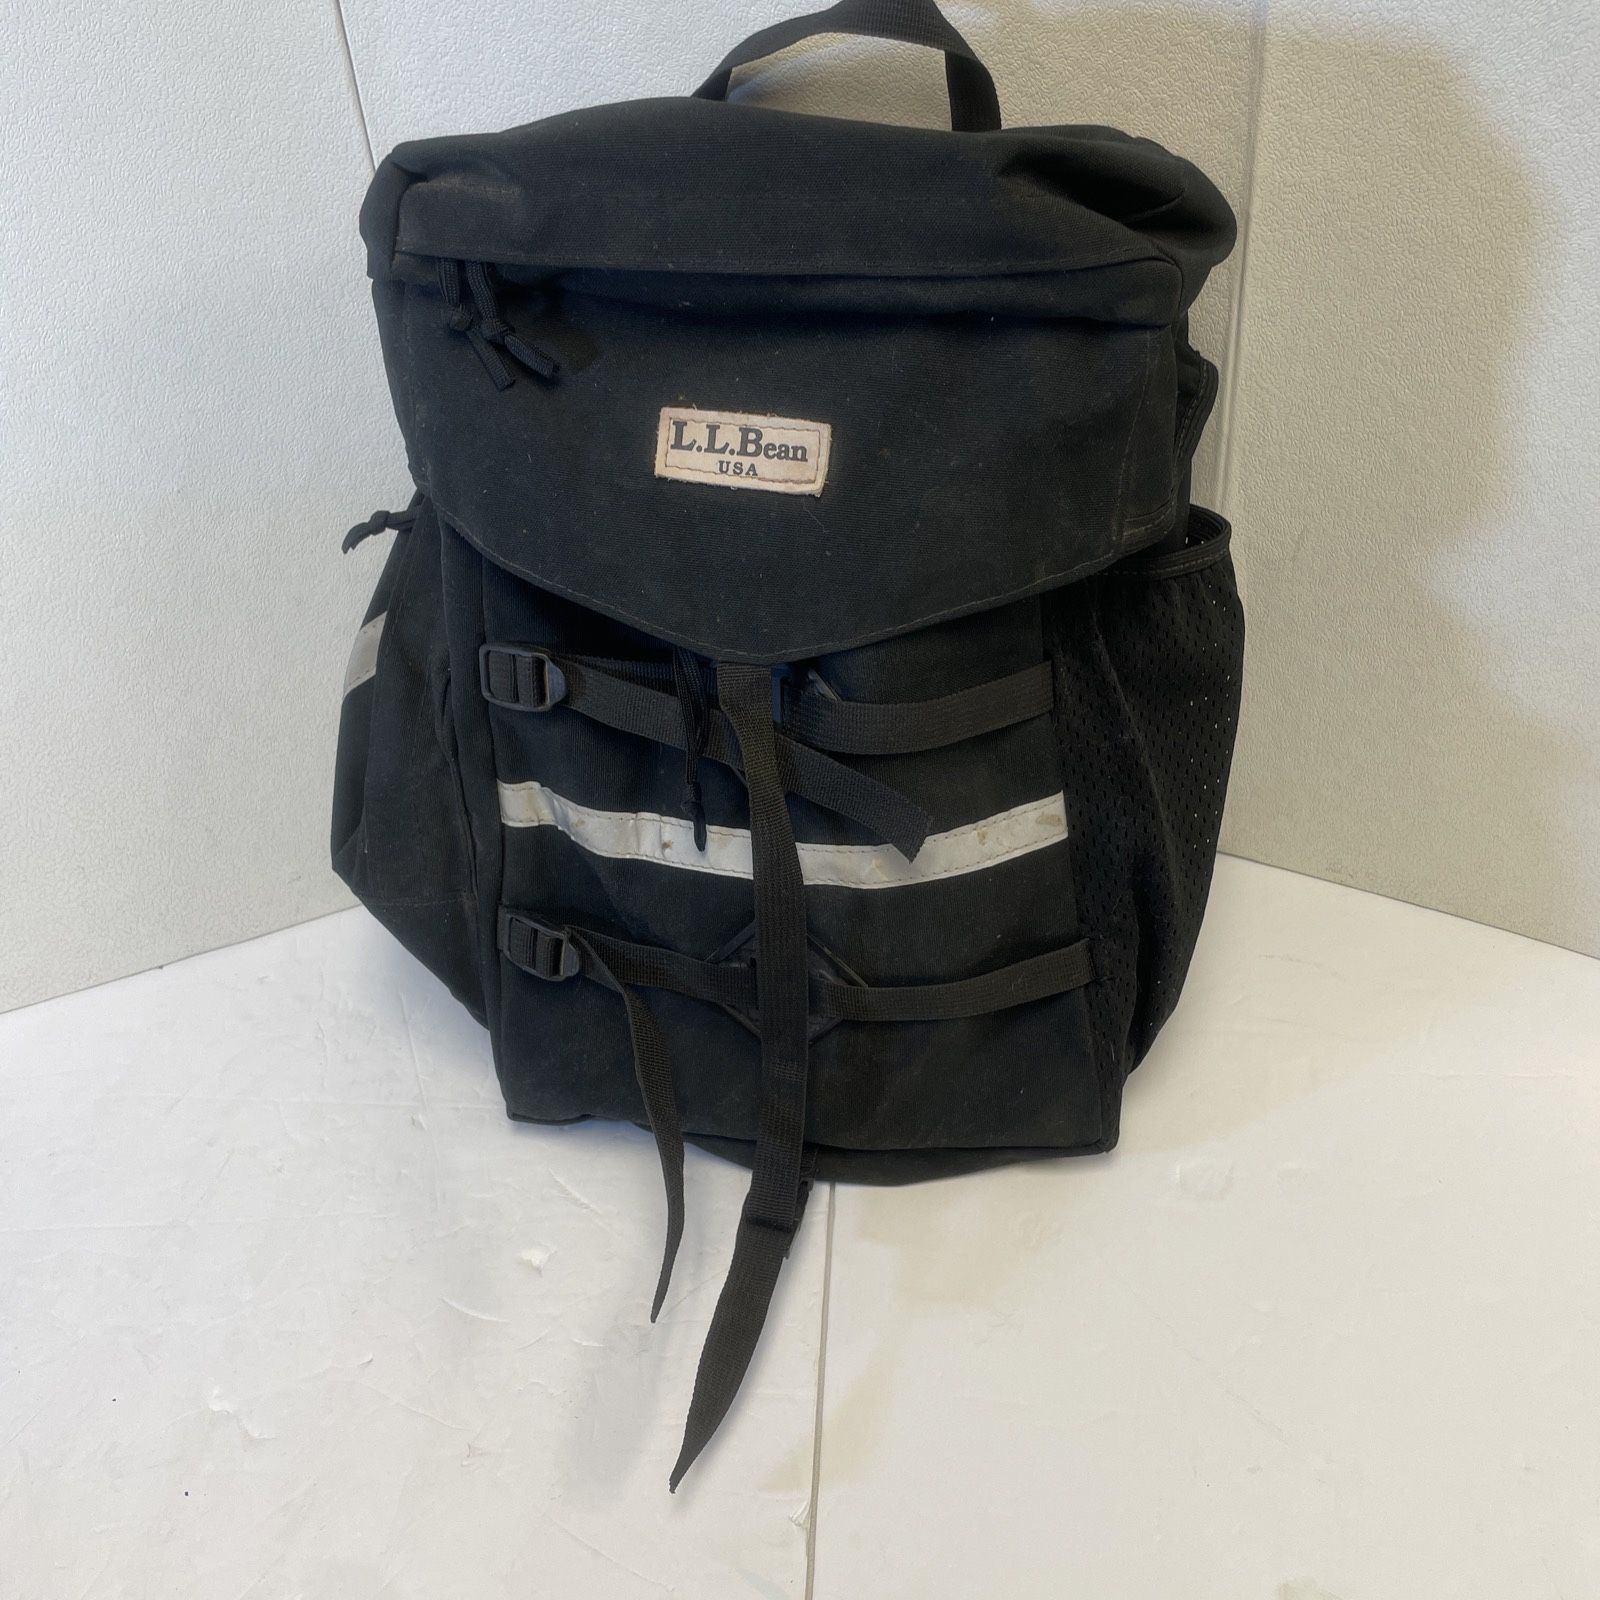 Vintage LL Bean USA Bicycle Bag Backpack Convertible With Clips Hiking - Black